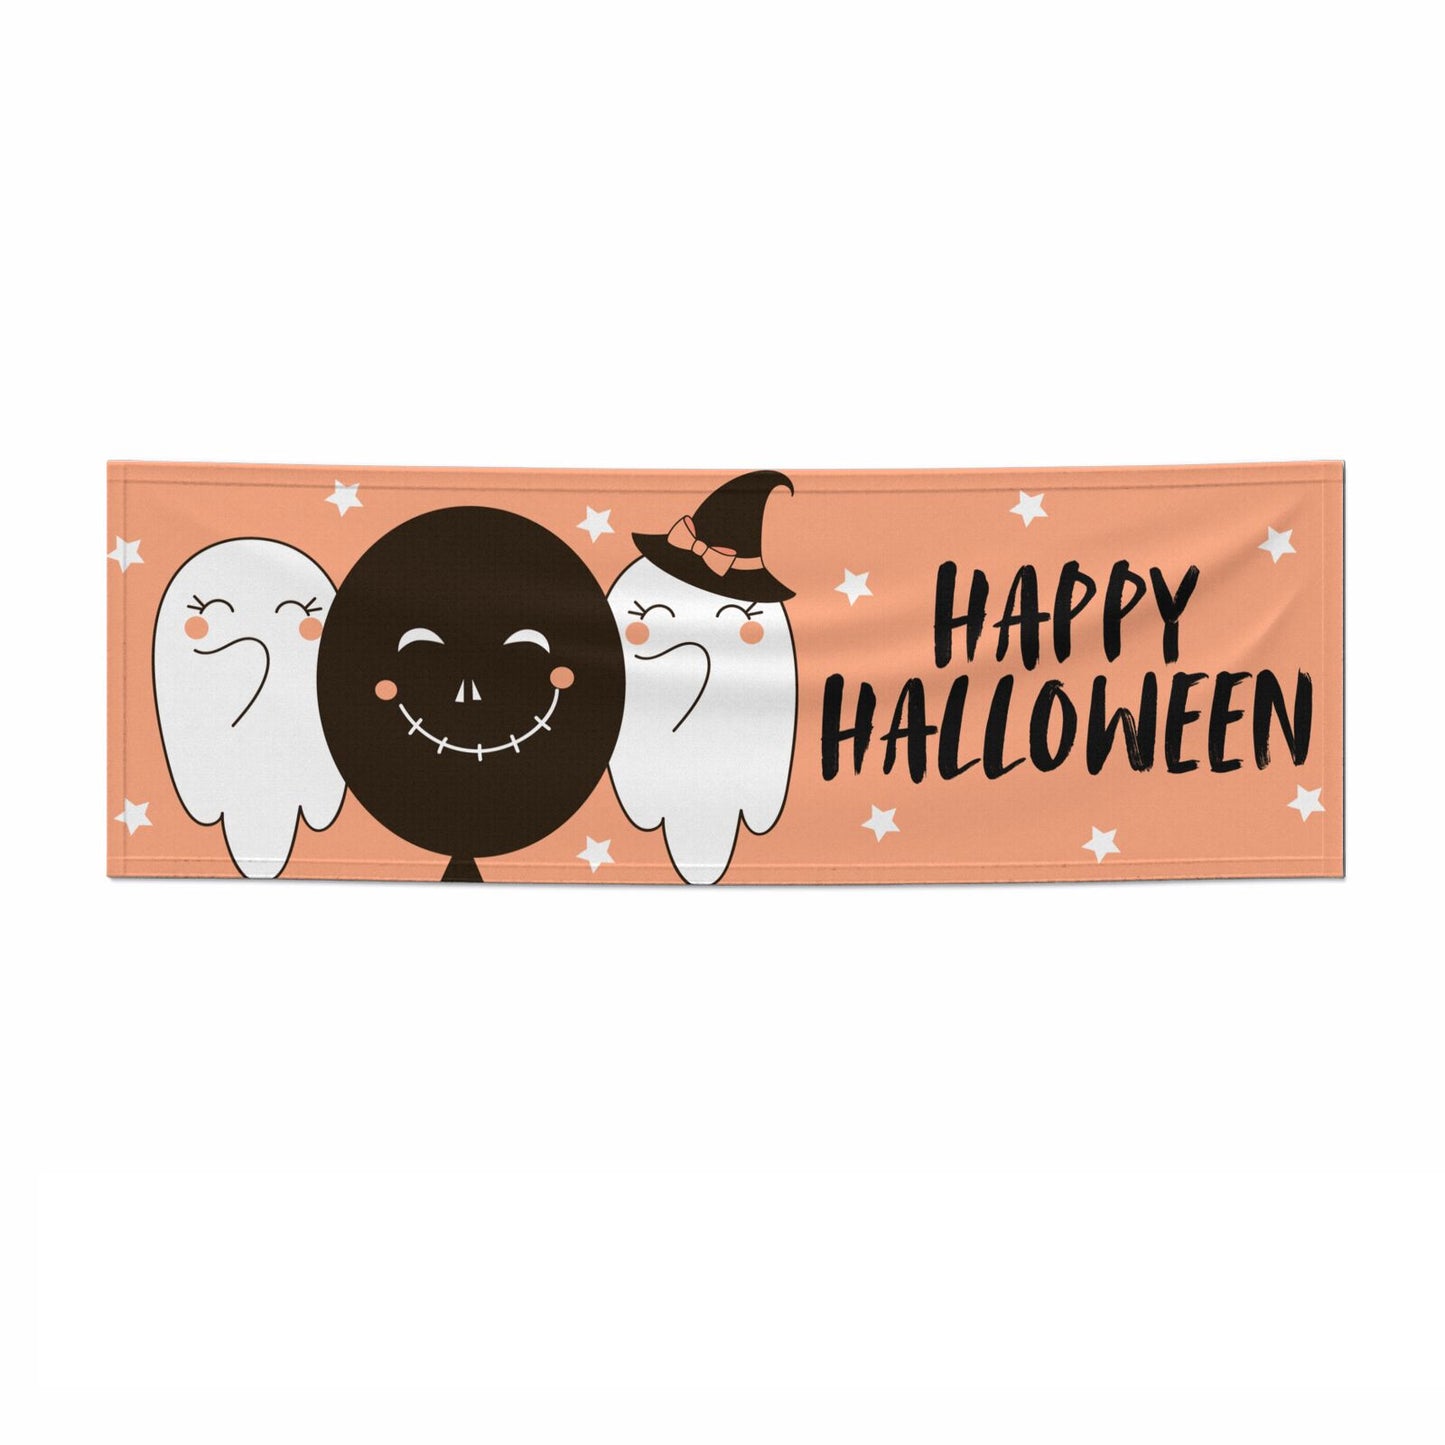 Happy Halloween Ghostly 6x2 Paper Banner